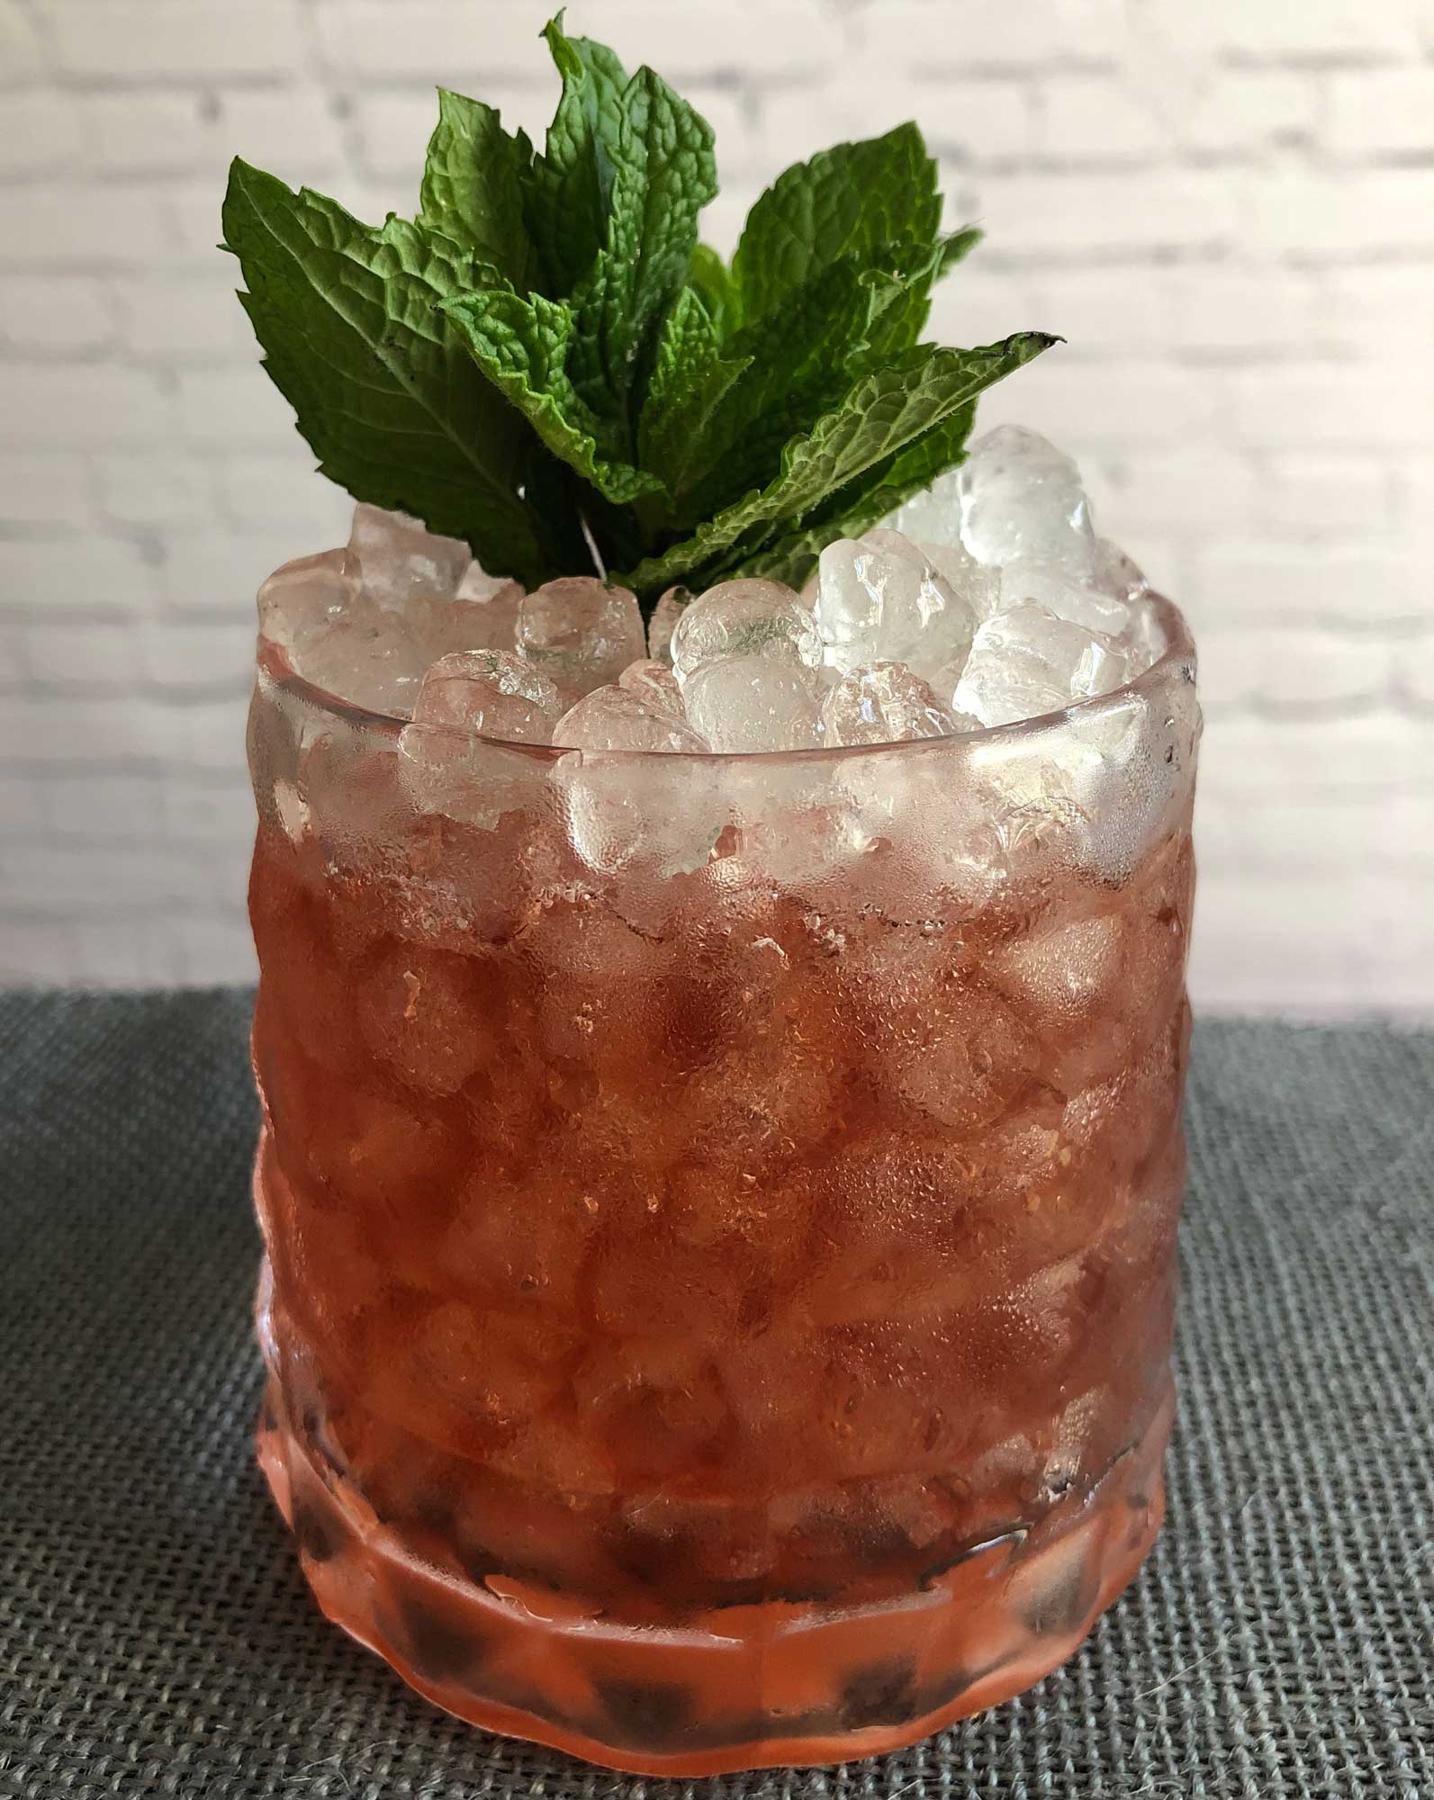 An example of the Berbyrrh, the mixed drink (drink) featuring Byrrh Grand Quinquina, verbena tisane, sprig of mint, and lemon twist; photo by Lee Edwards